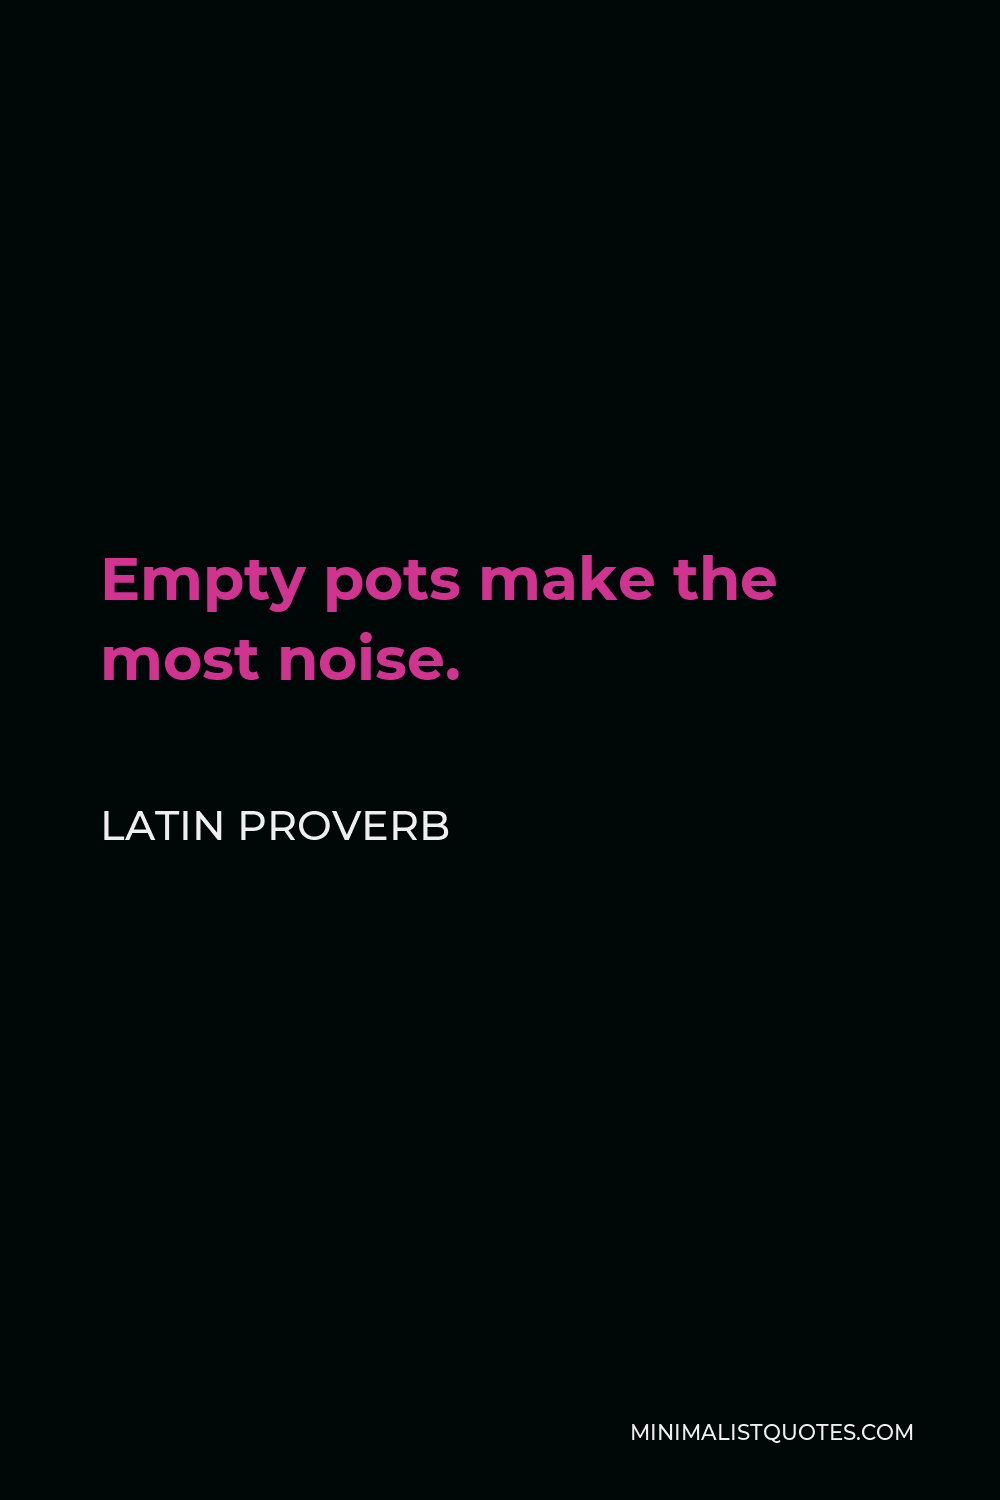 Latin Proverb Quote - Empty pots make the most noise.